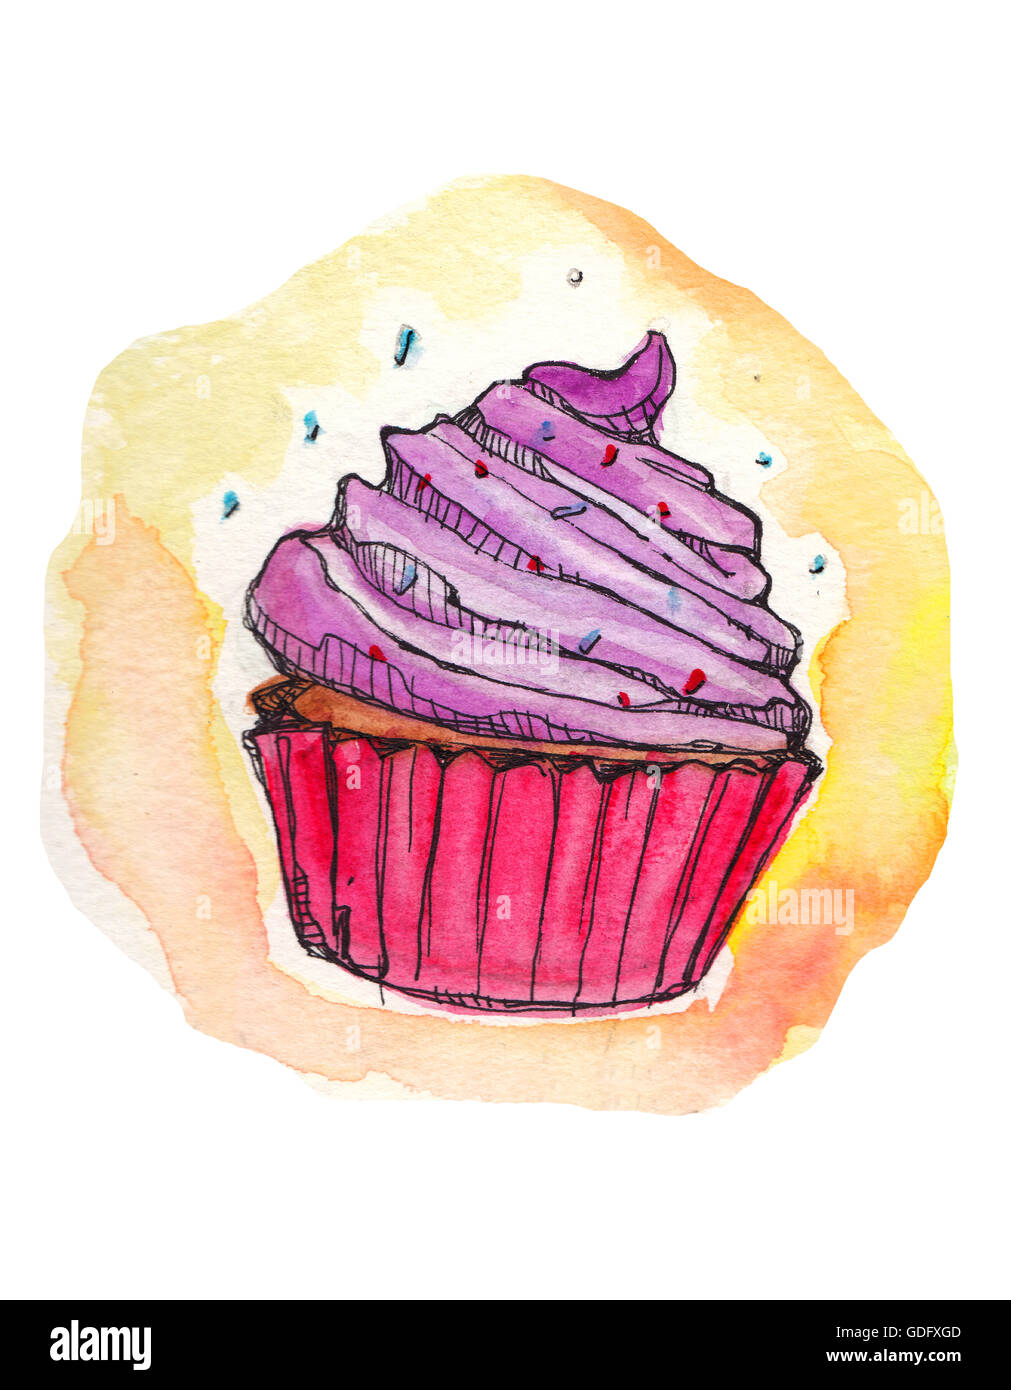 Hand drawn illustration or drawing of a cupcake Stock Photo